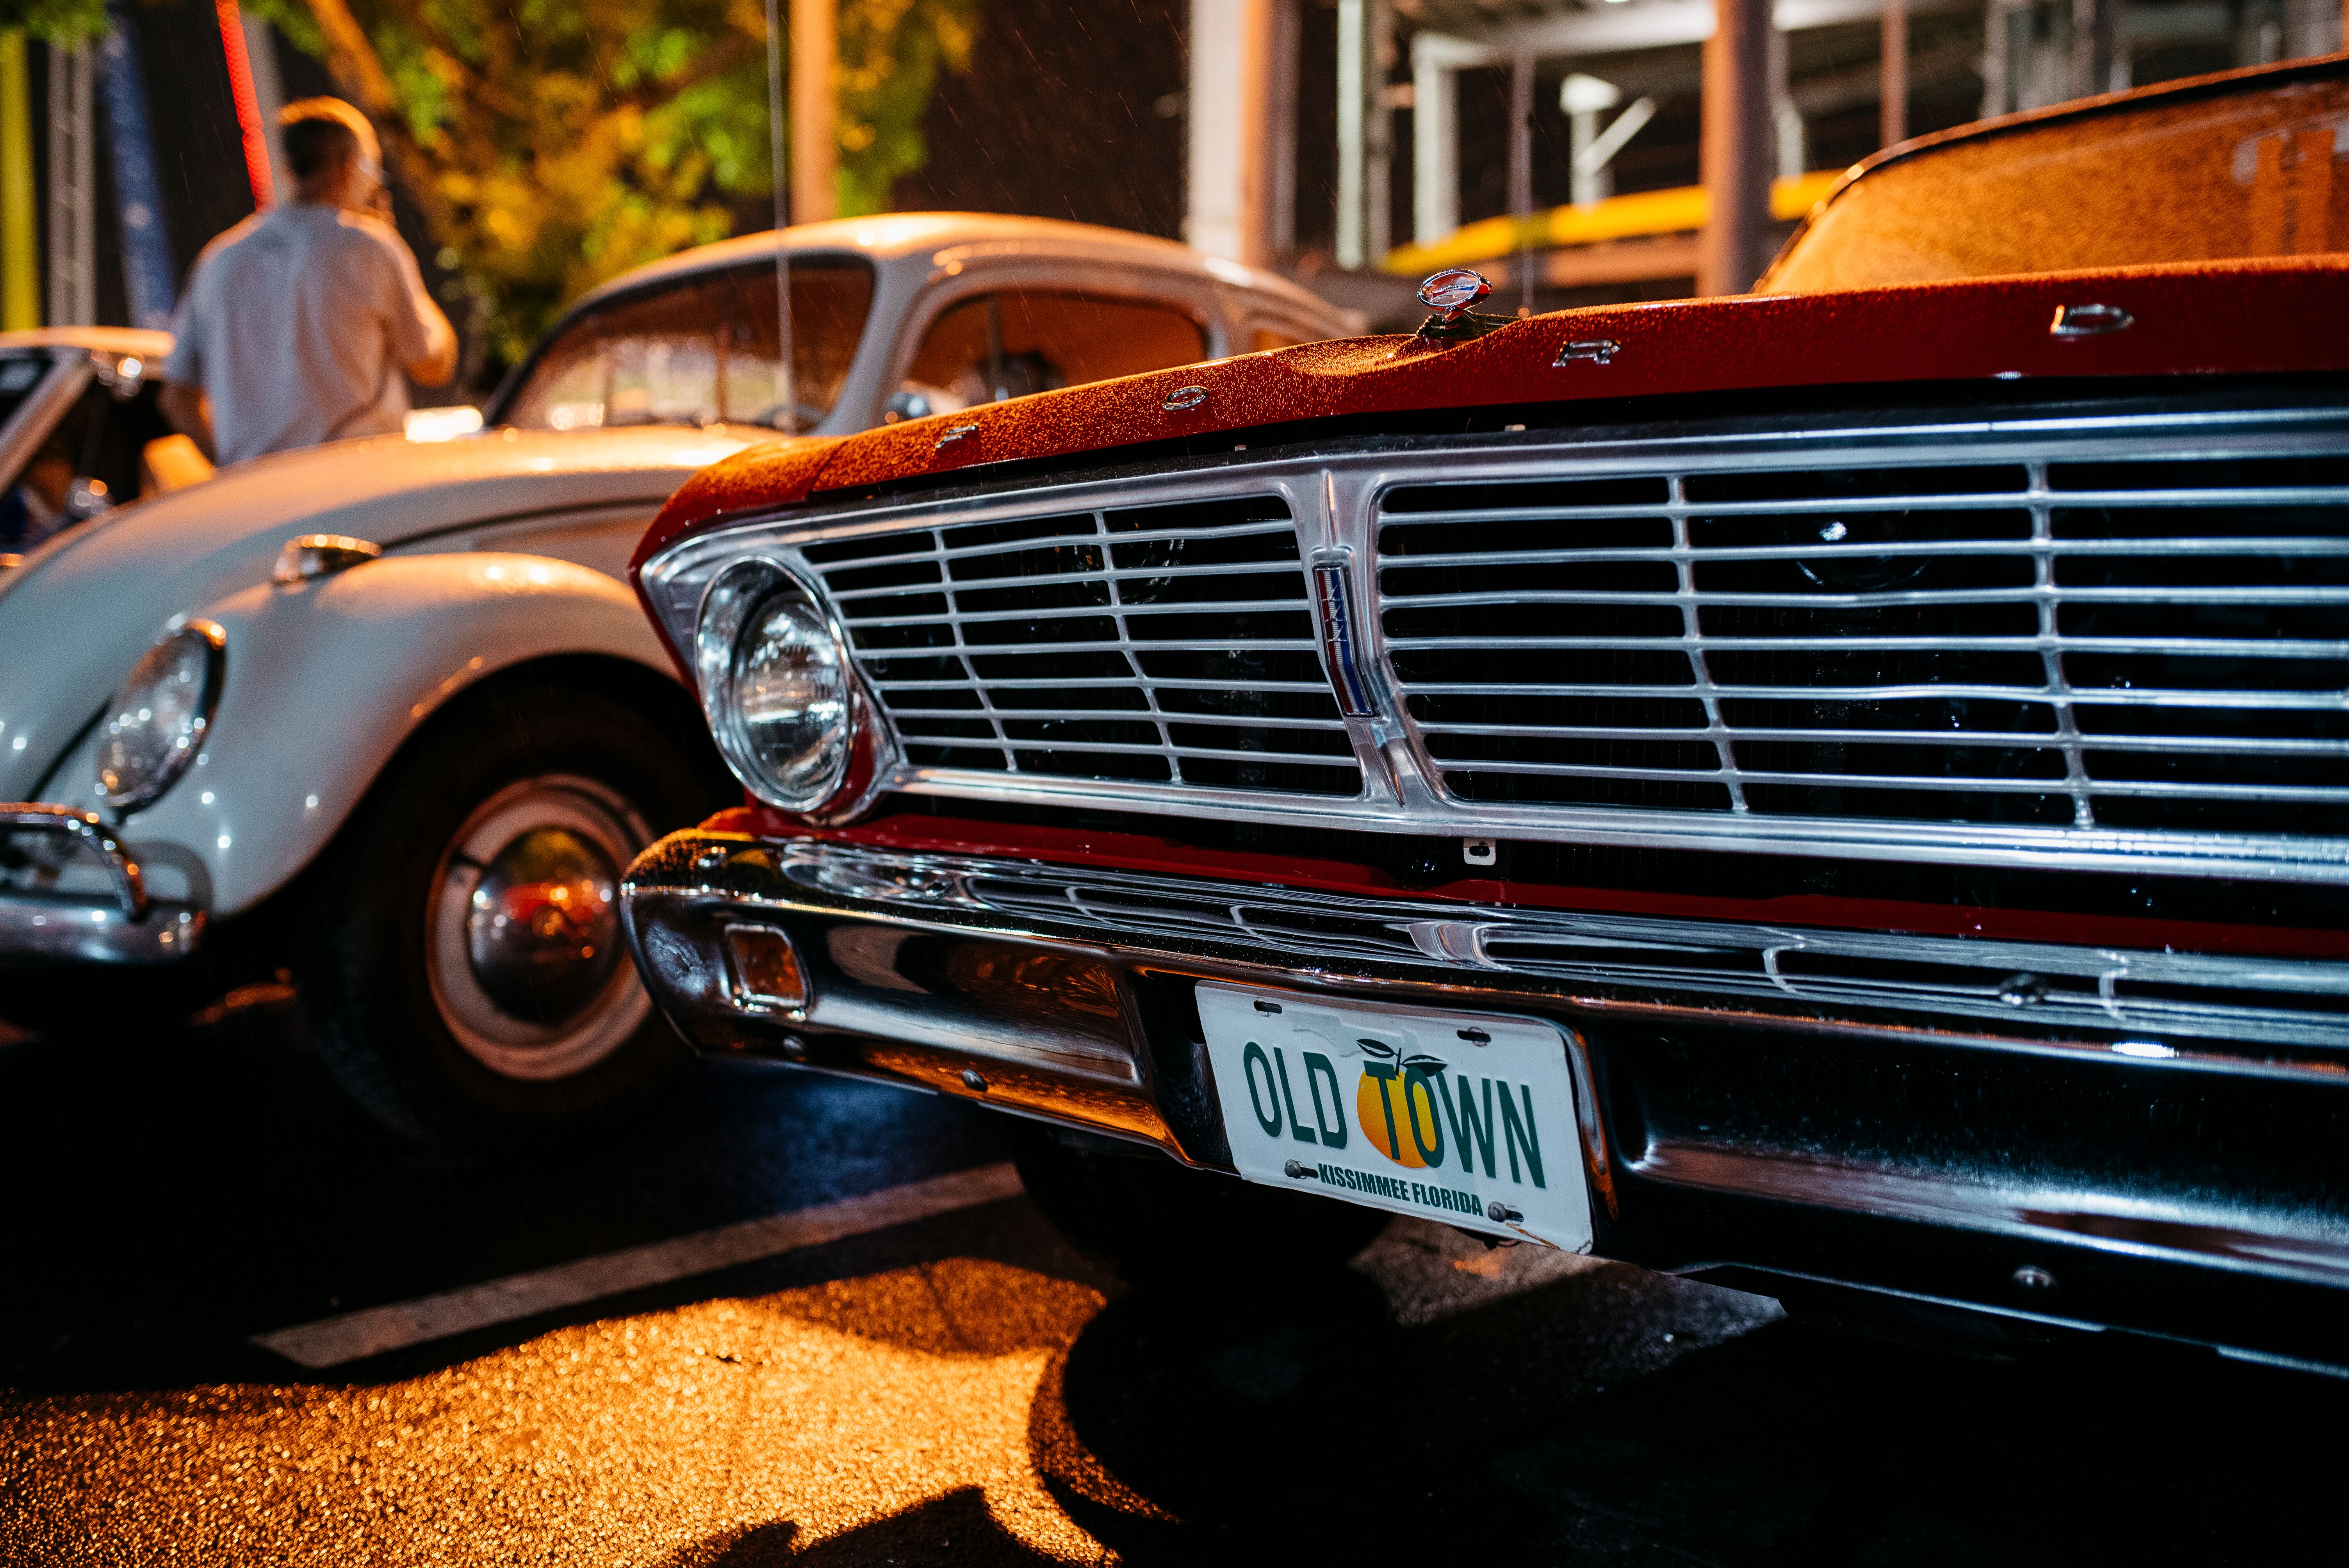 Car Shows and Live Music Every Weekend At Old Town